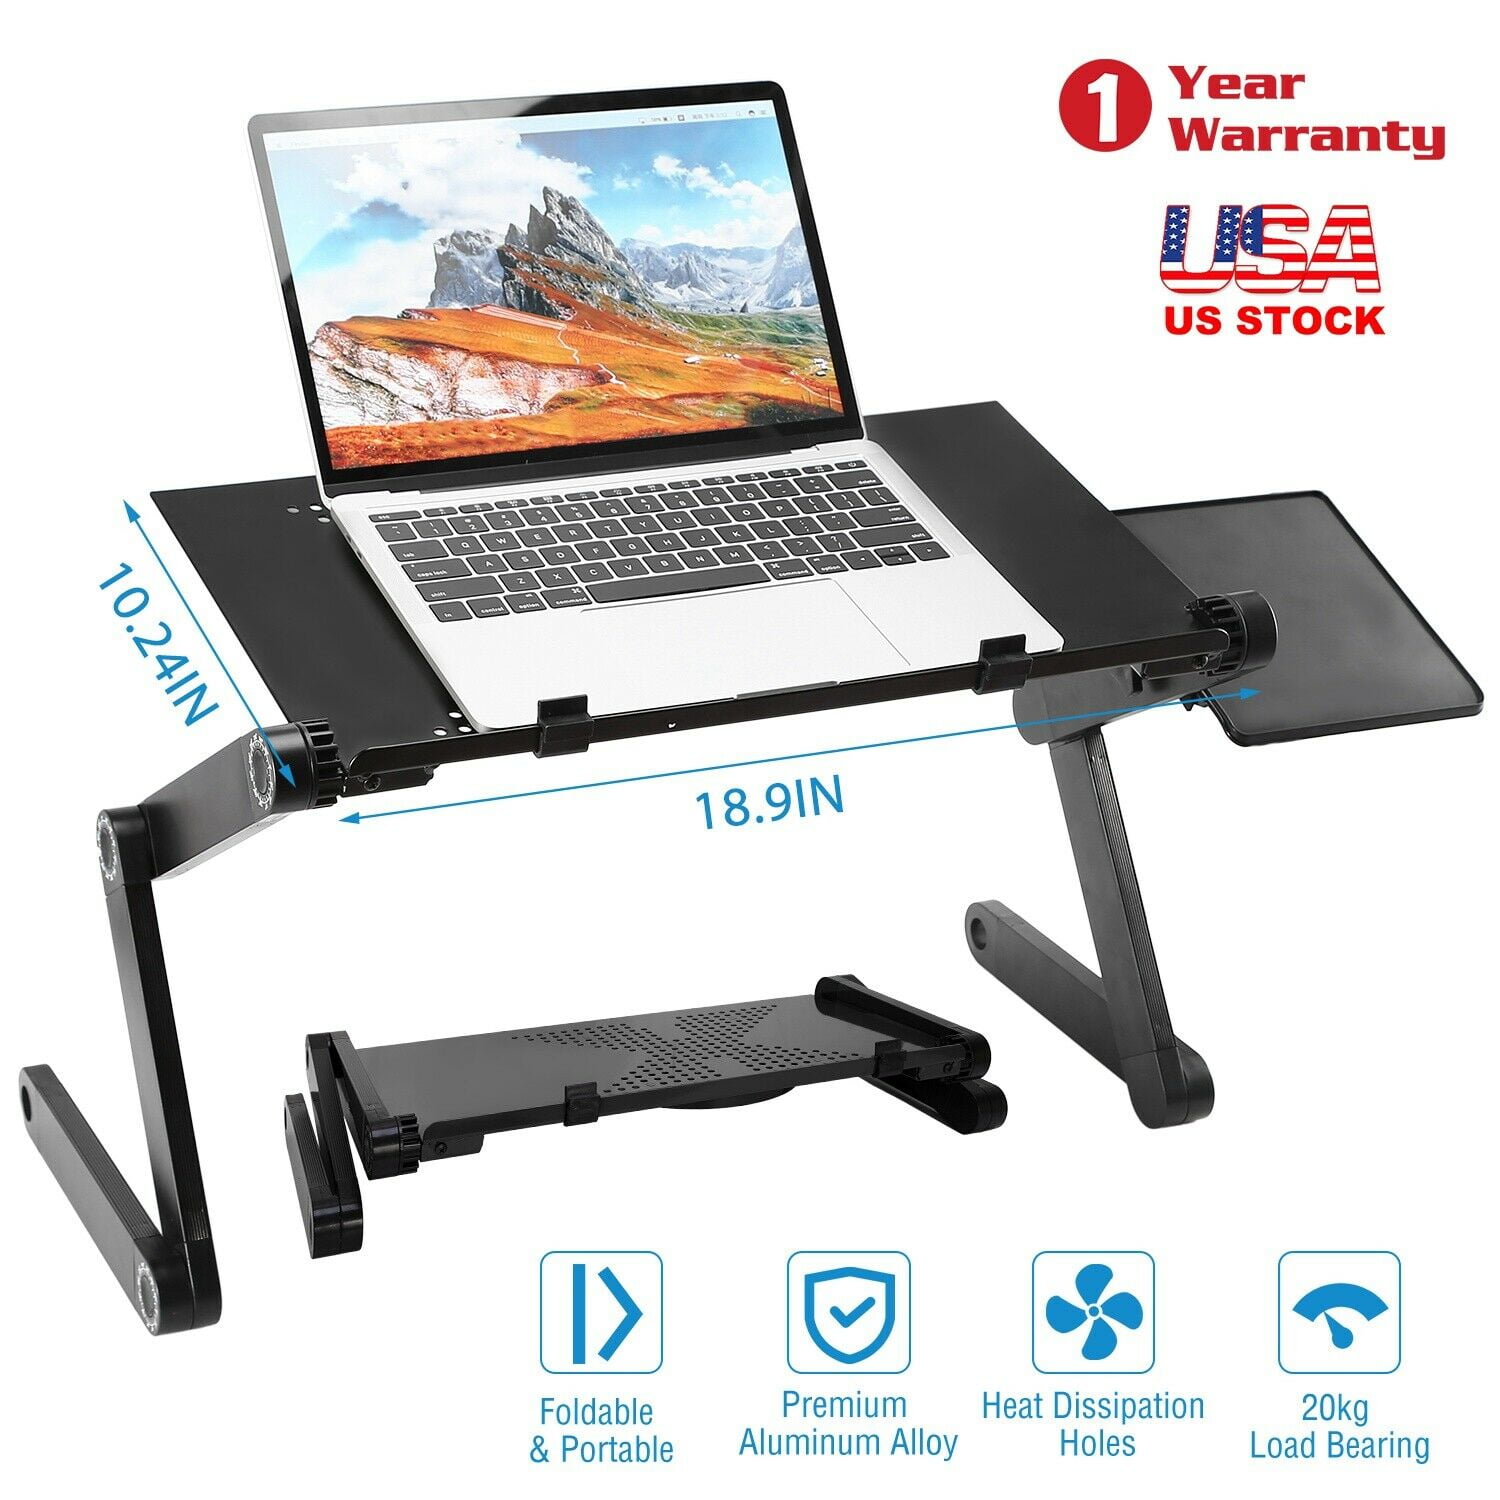 Foldable Laptop Table Stand,Adjustable Tabletop Aluminum Ergonomics Design Cozy Desk TV Bed Lap Tray Stand up/Sitting